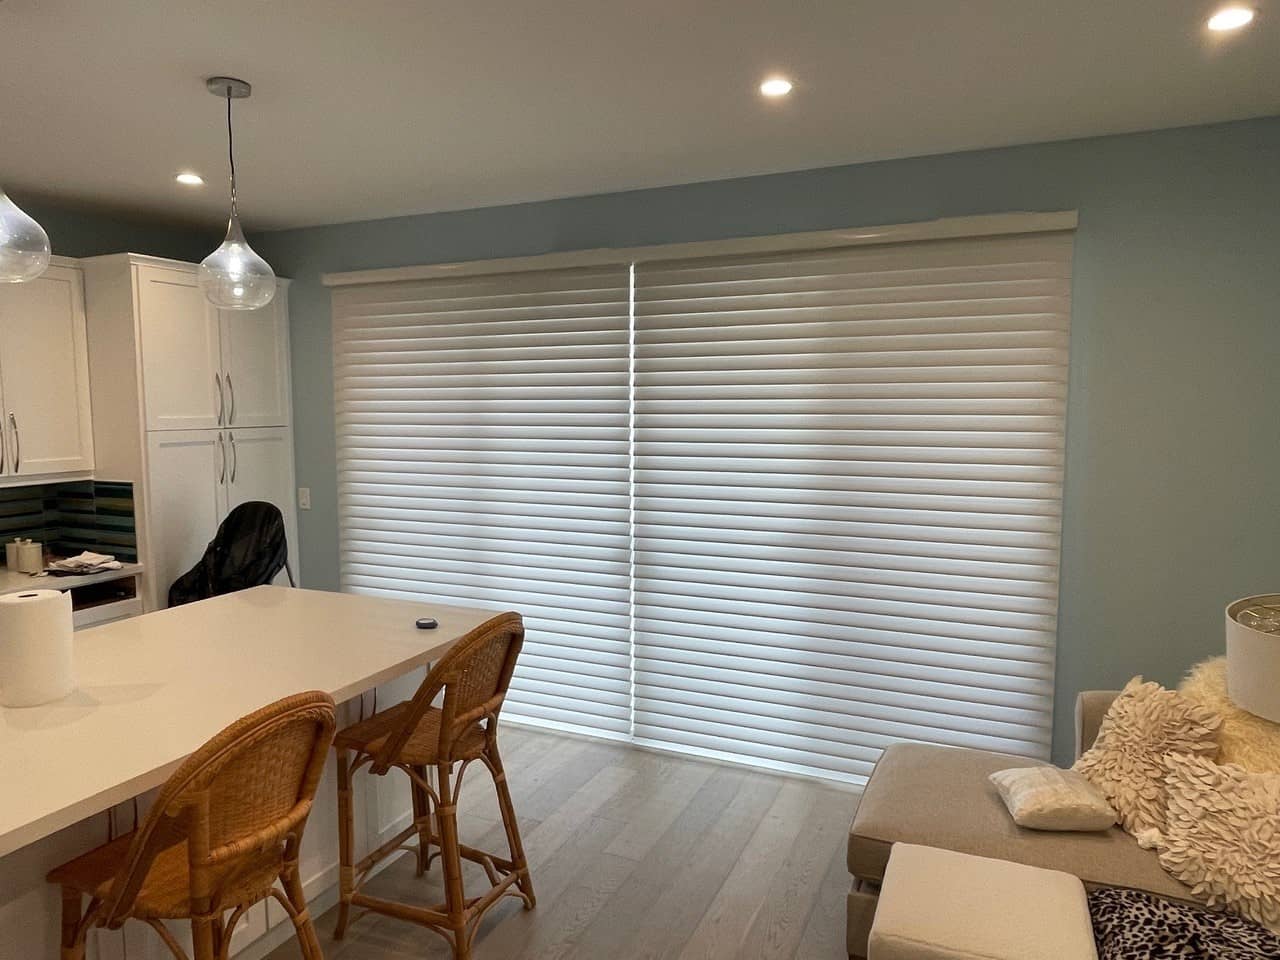 Window Shades: Your Solution to Privacy and Light Control